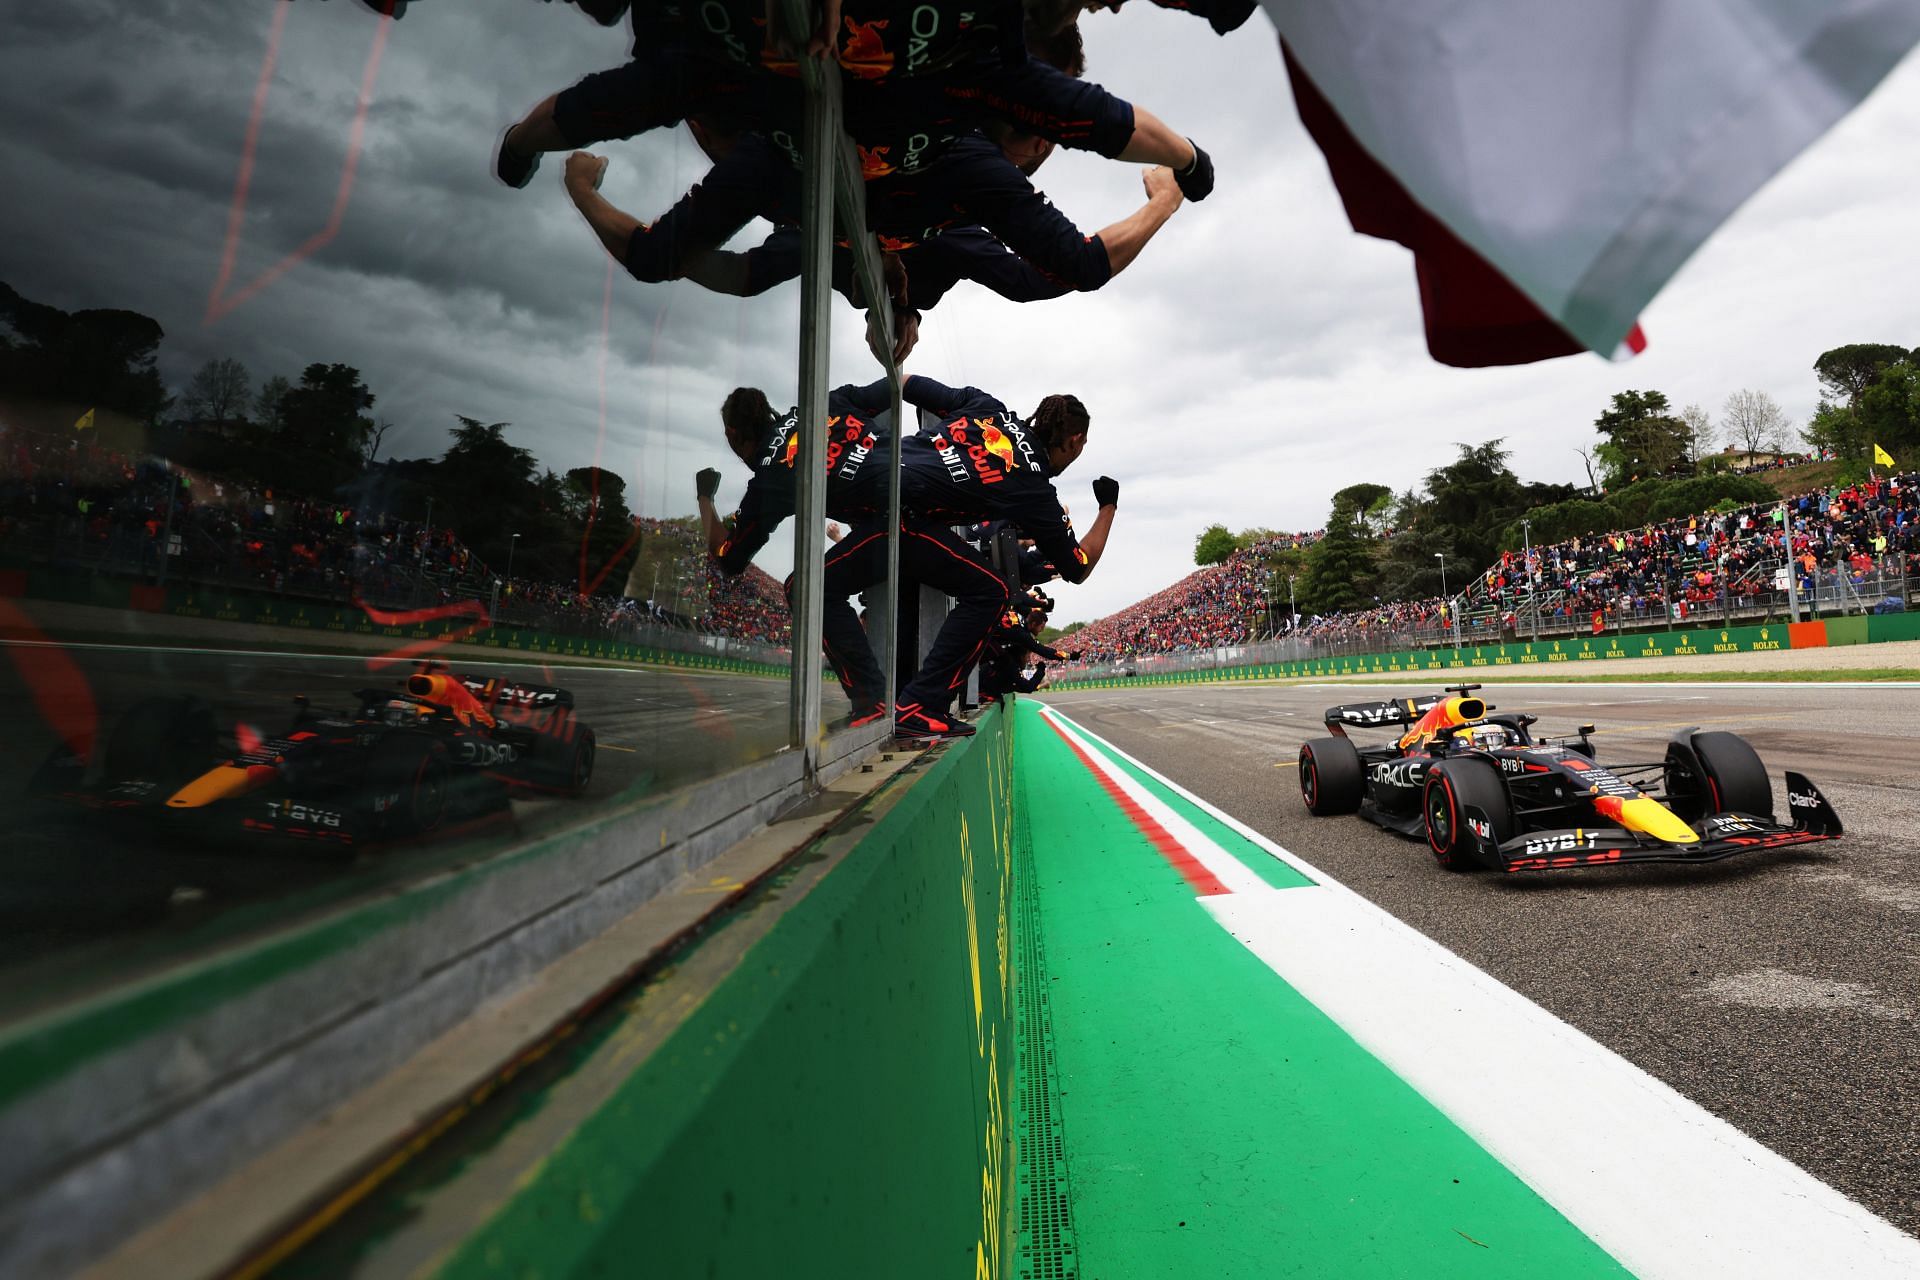 Red Bull celebrates on the pit wall at the F1 Grand Prix of Emilia Romagna